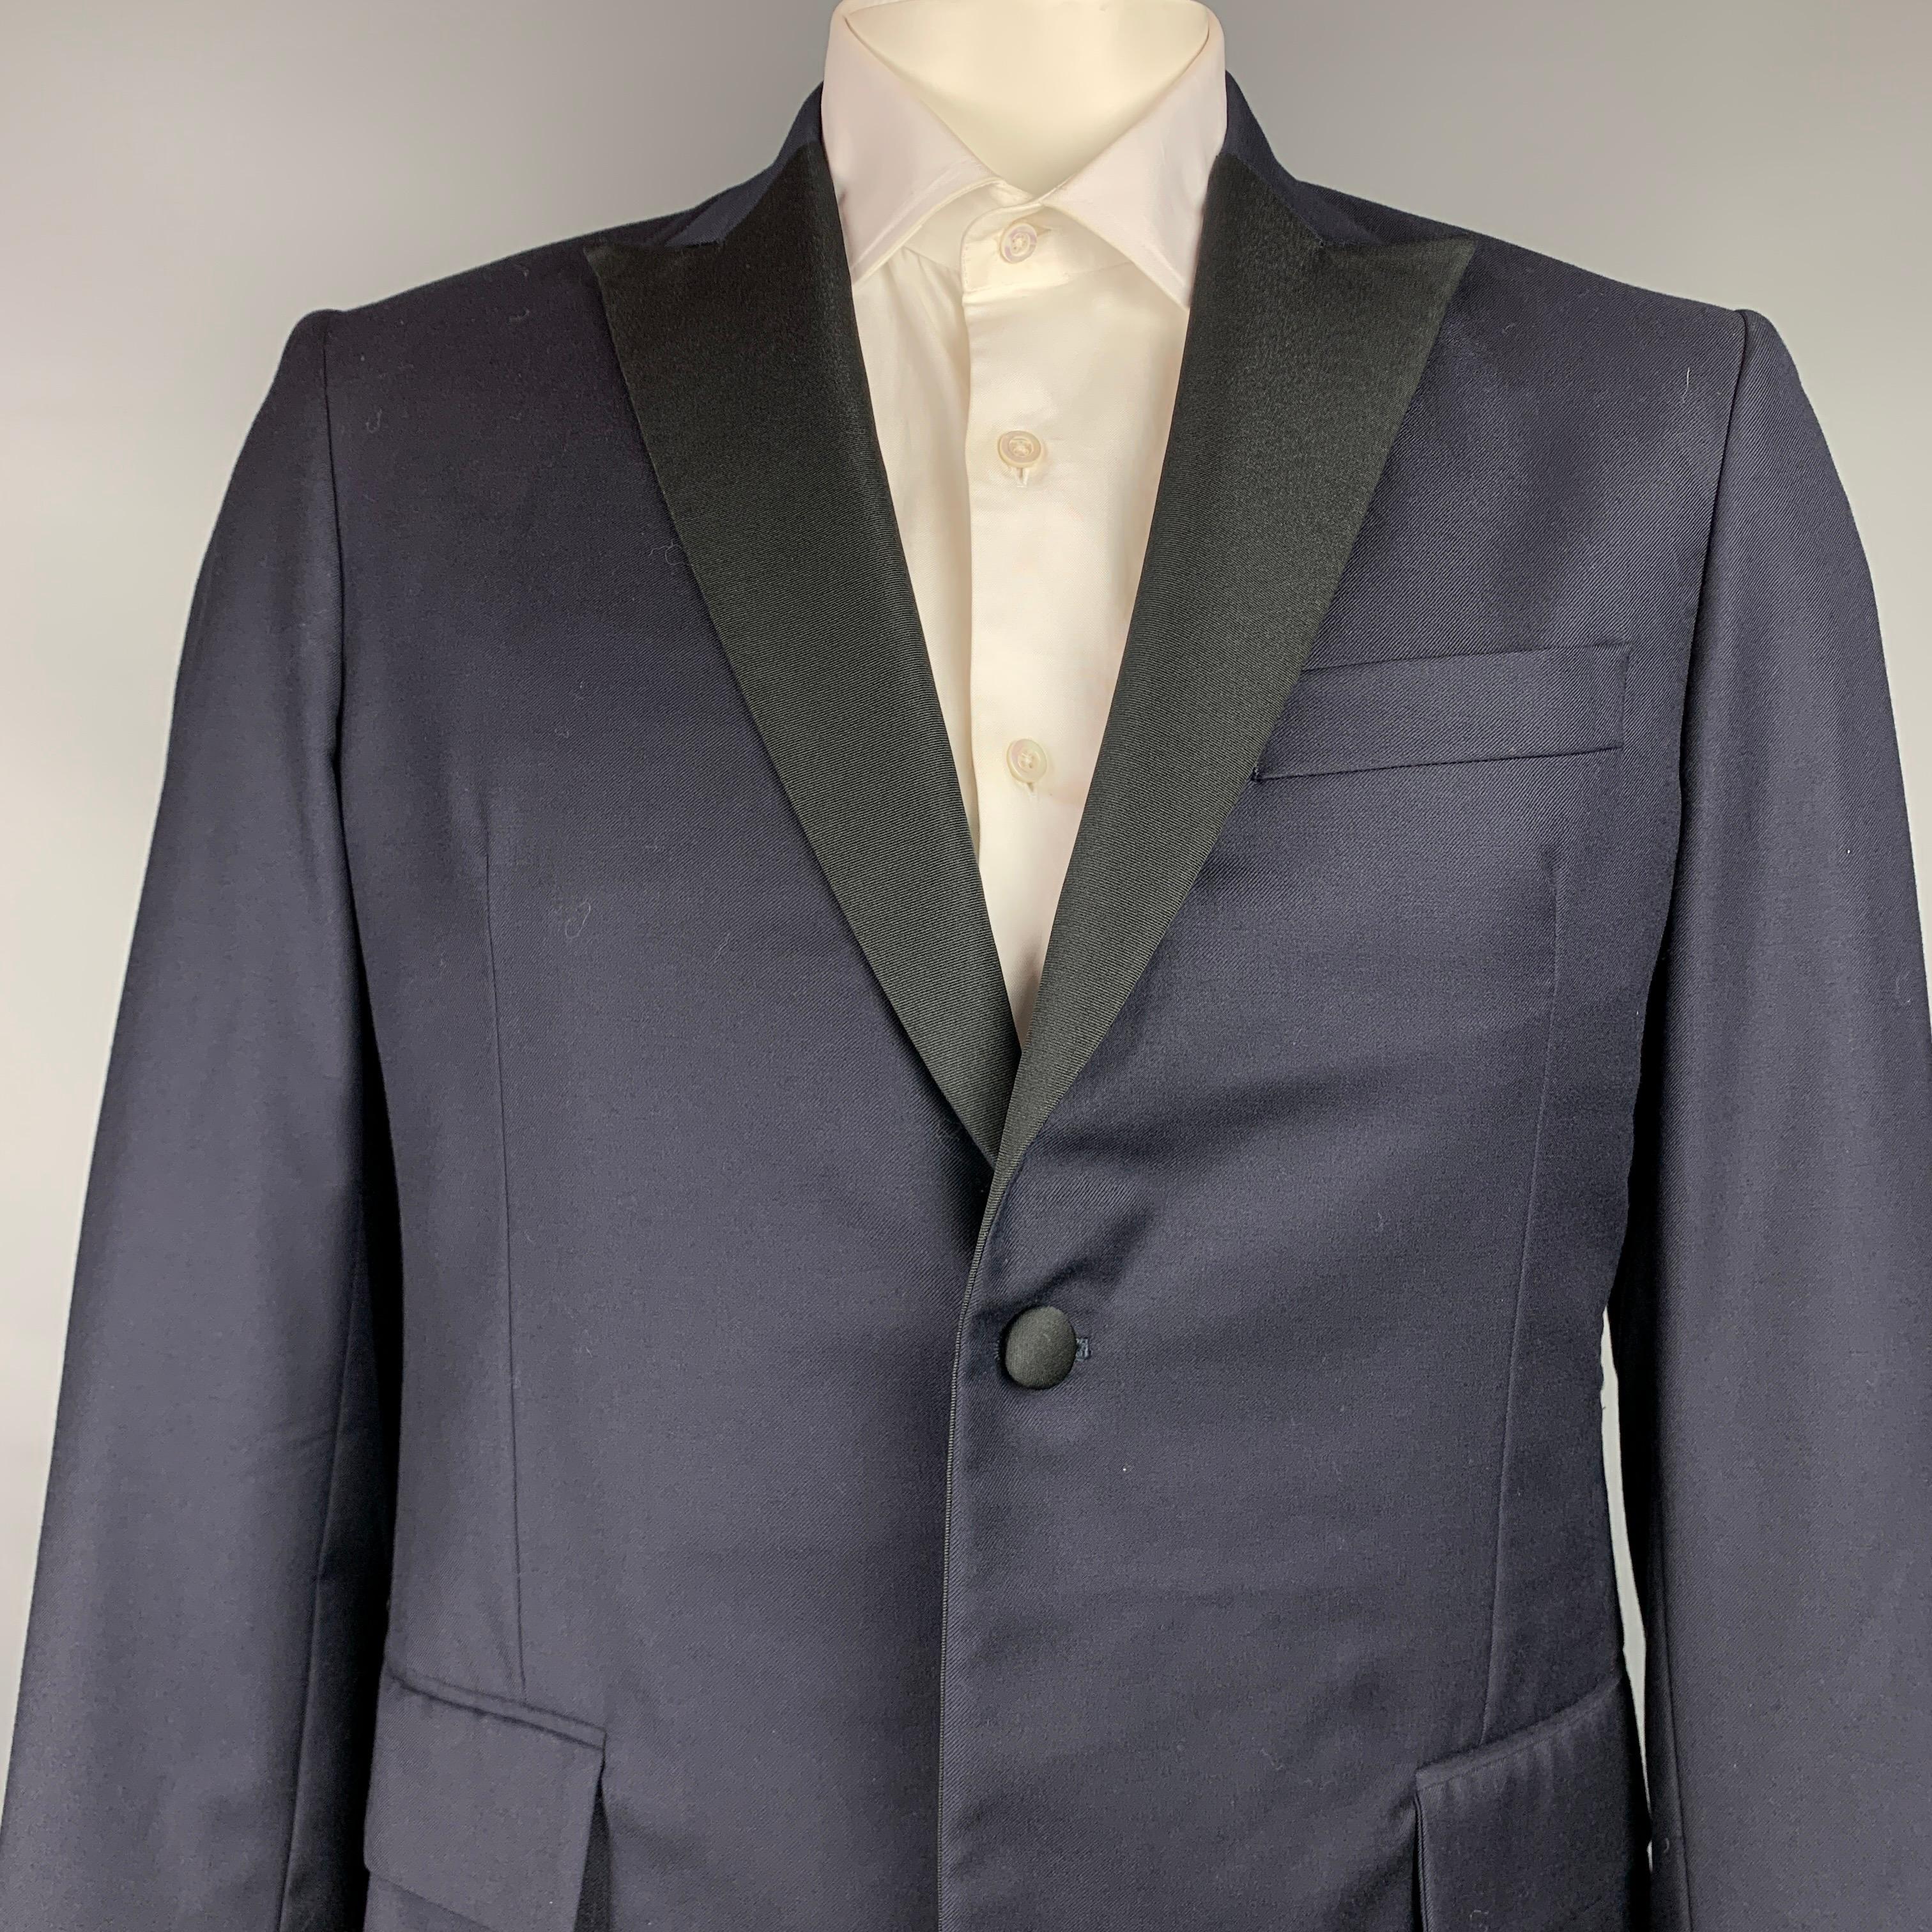 TODD SNYDER sport coat comes in a navy & black wool with a half liner featuring a peak lapel, flap pockets, and a single button closure. Made in USA.

Very Good Pre-Owned Condition.
Marked: 42R

Measurements:

Shoulder: 18 in.
Chest: 42 in.
Sleeve: